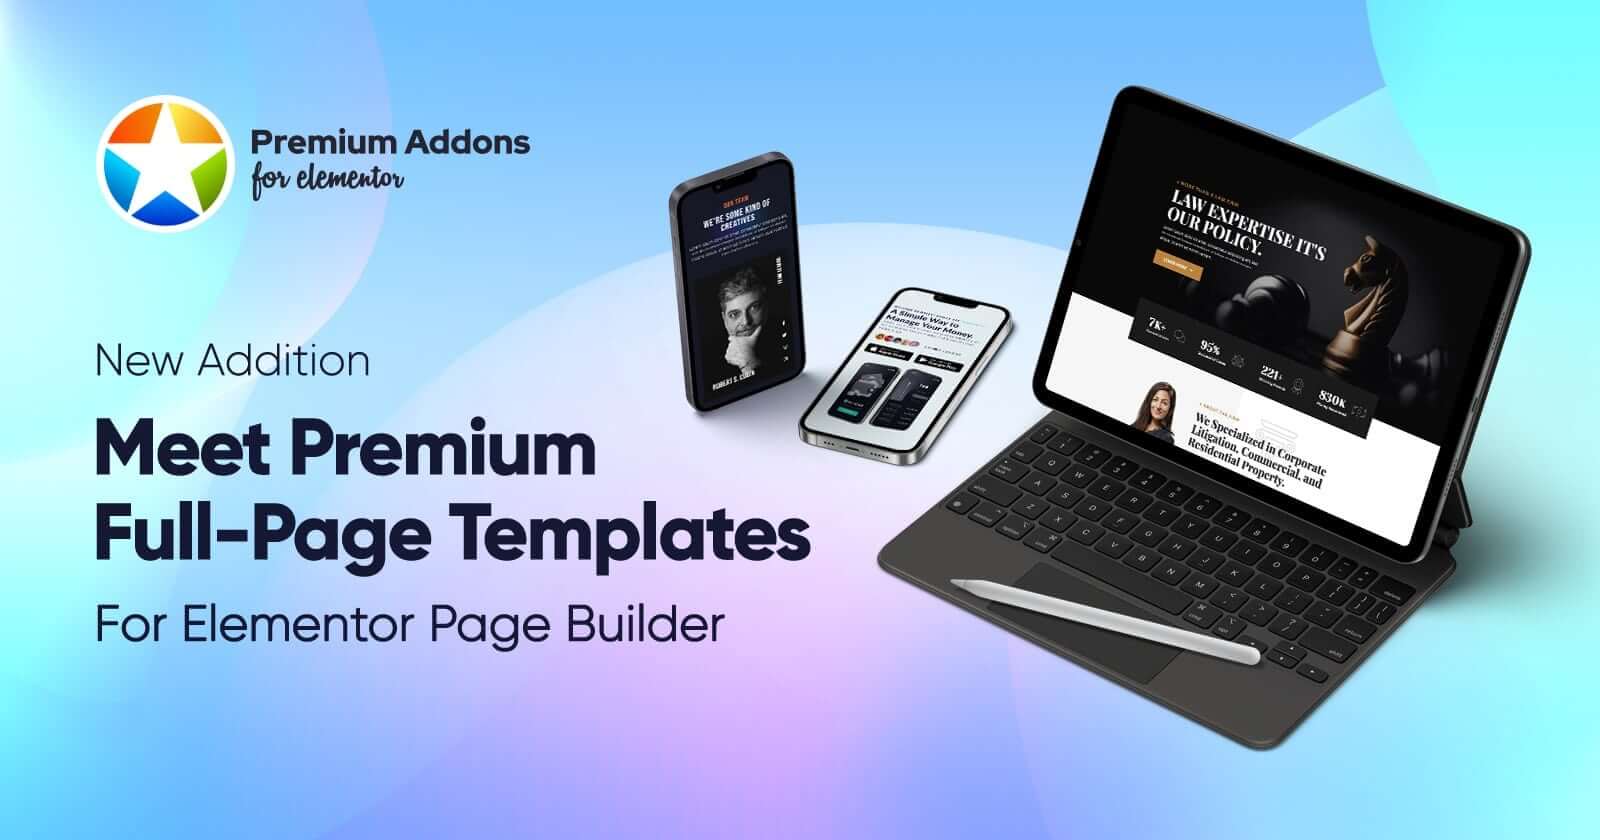 Elementor Full Page Templates in Premium Templates